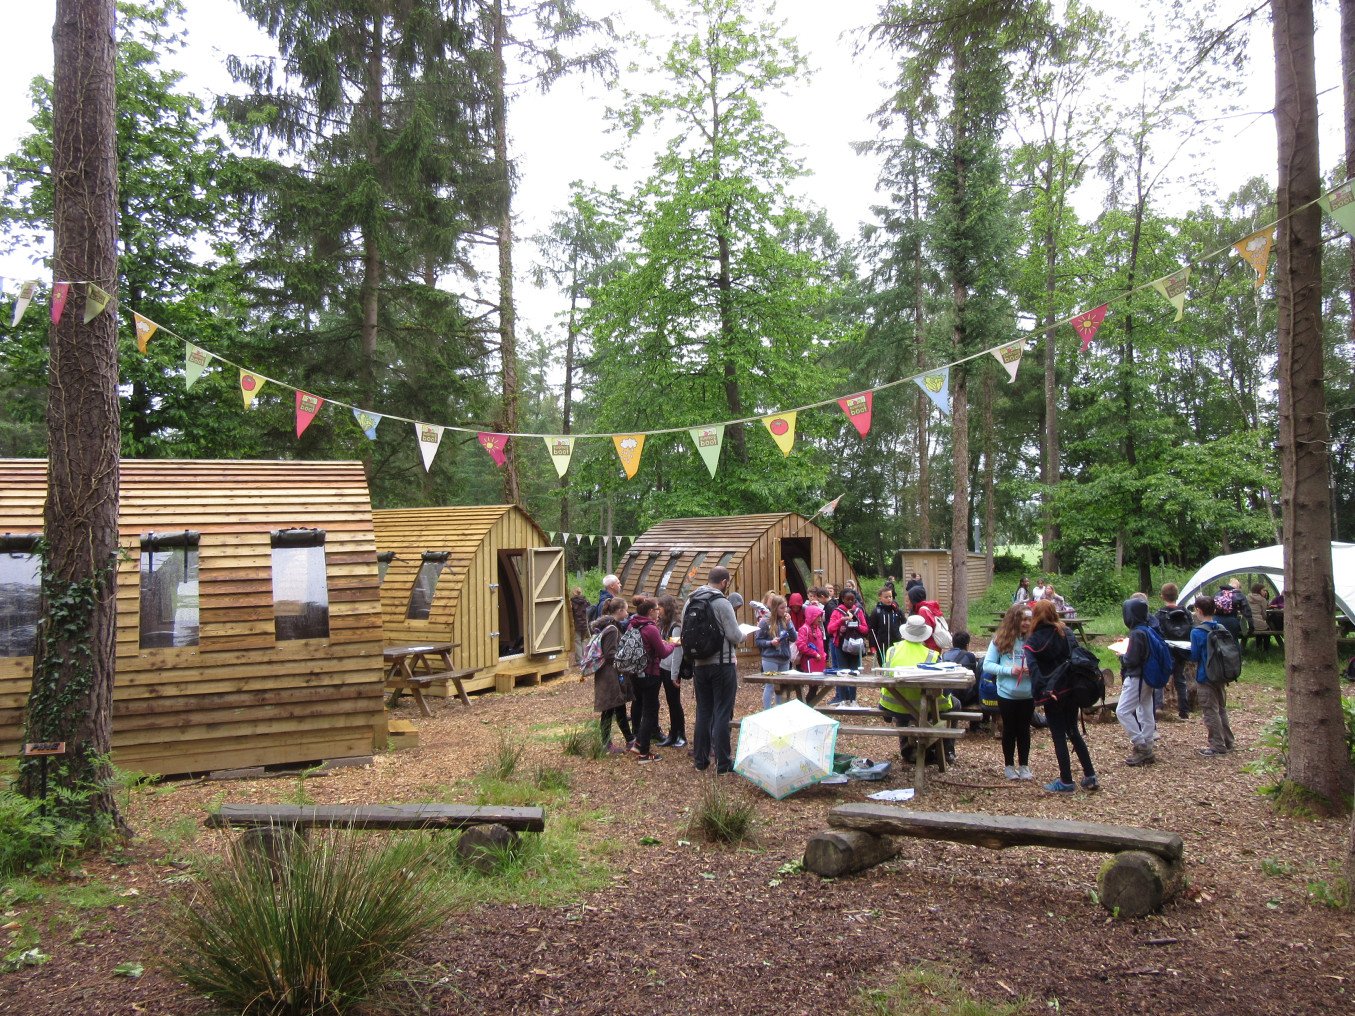 Large group of people around wood cabins